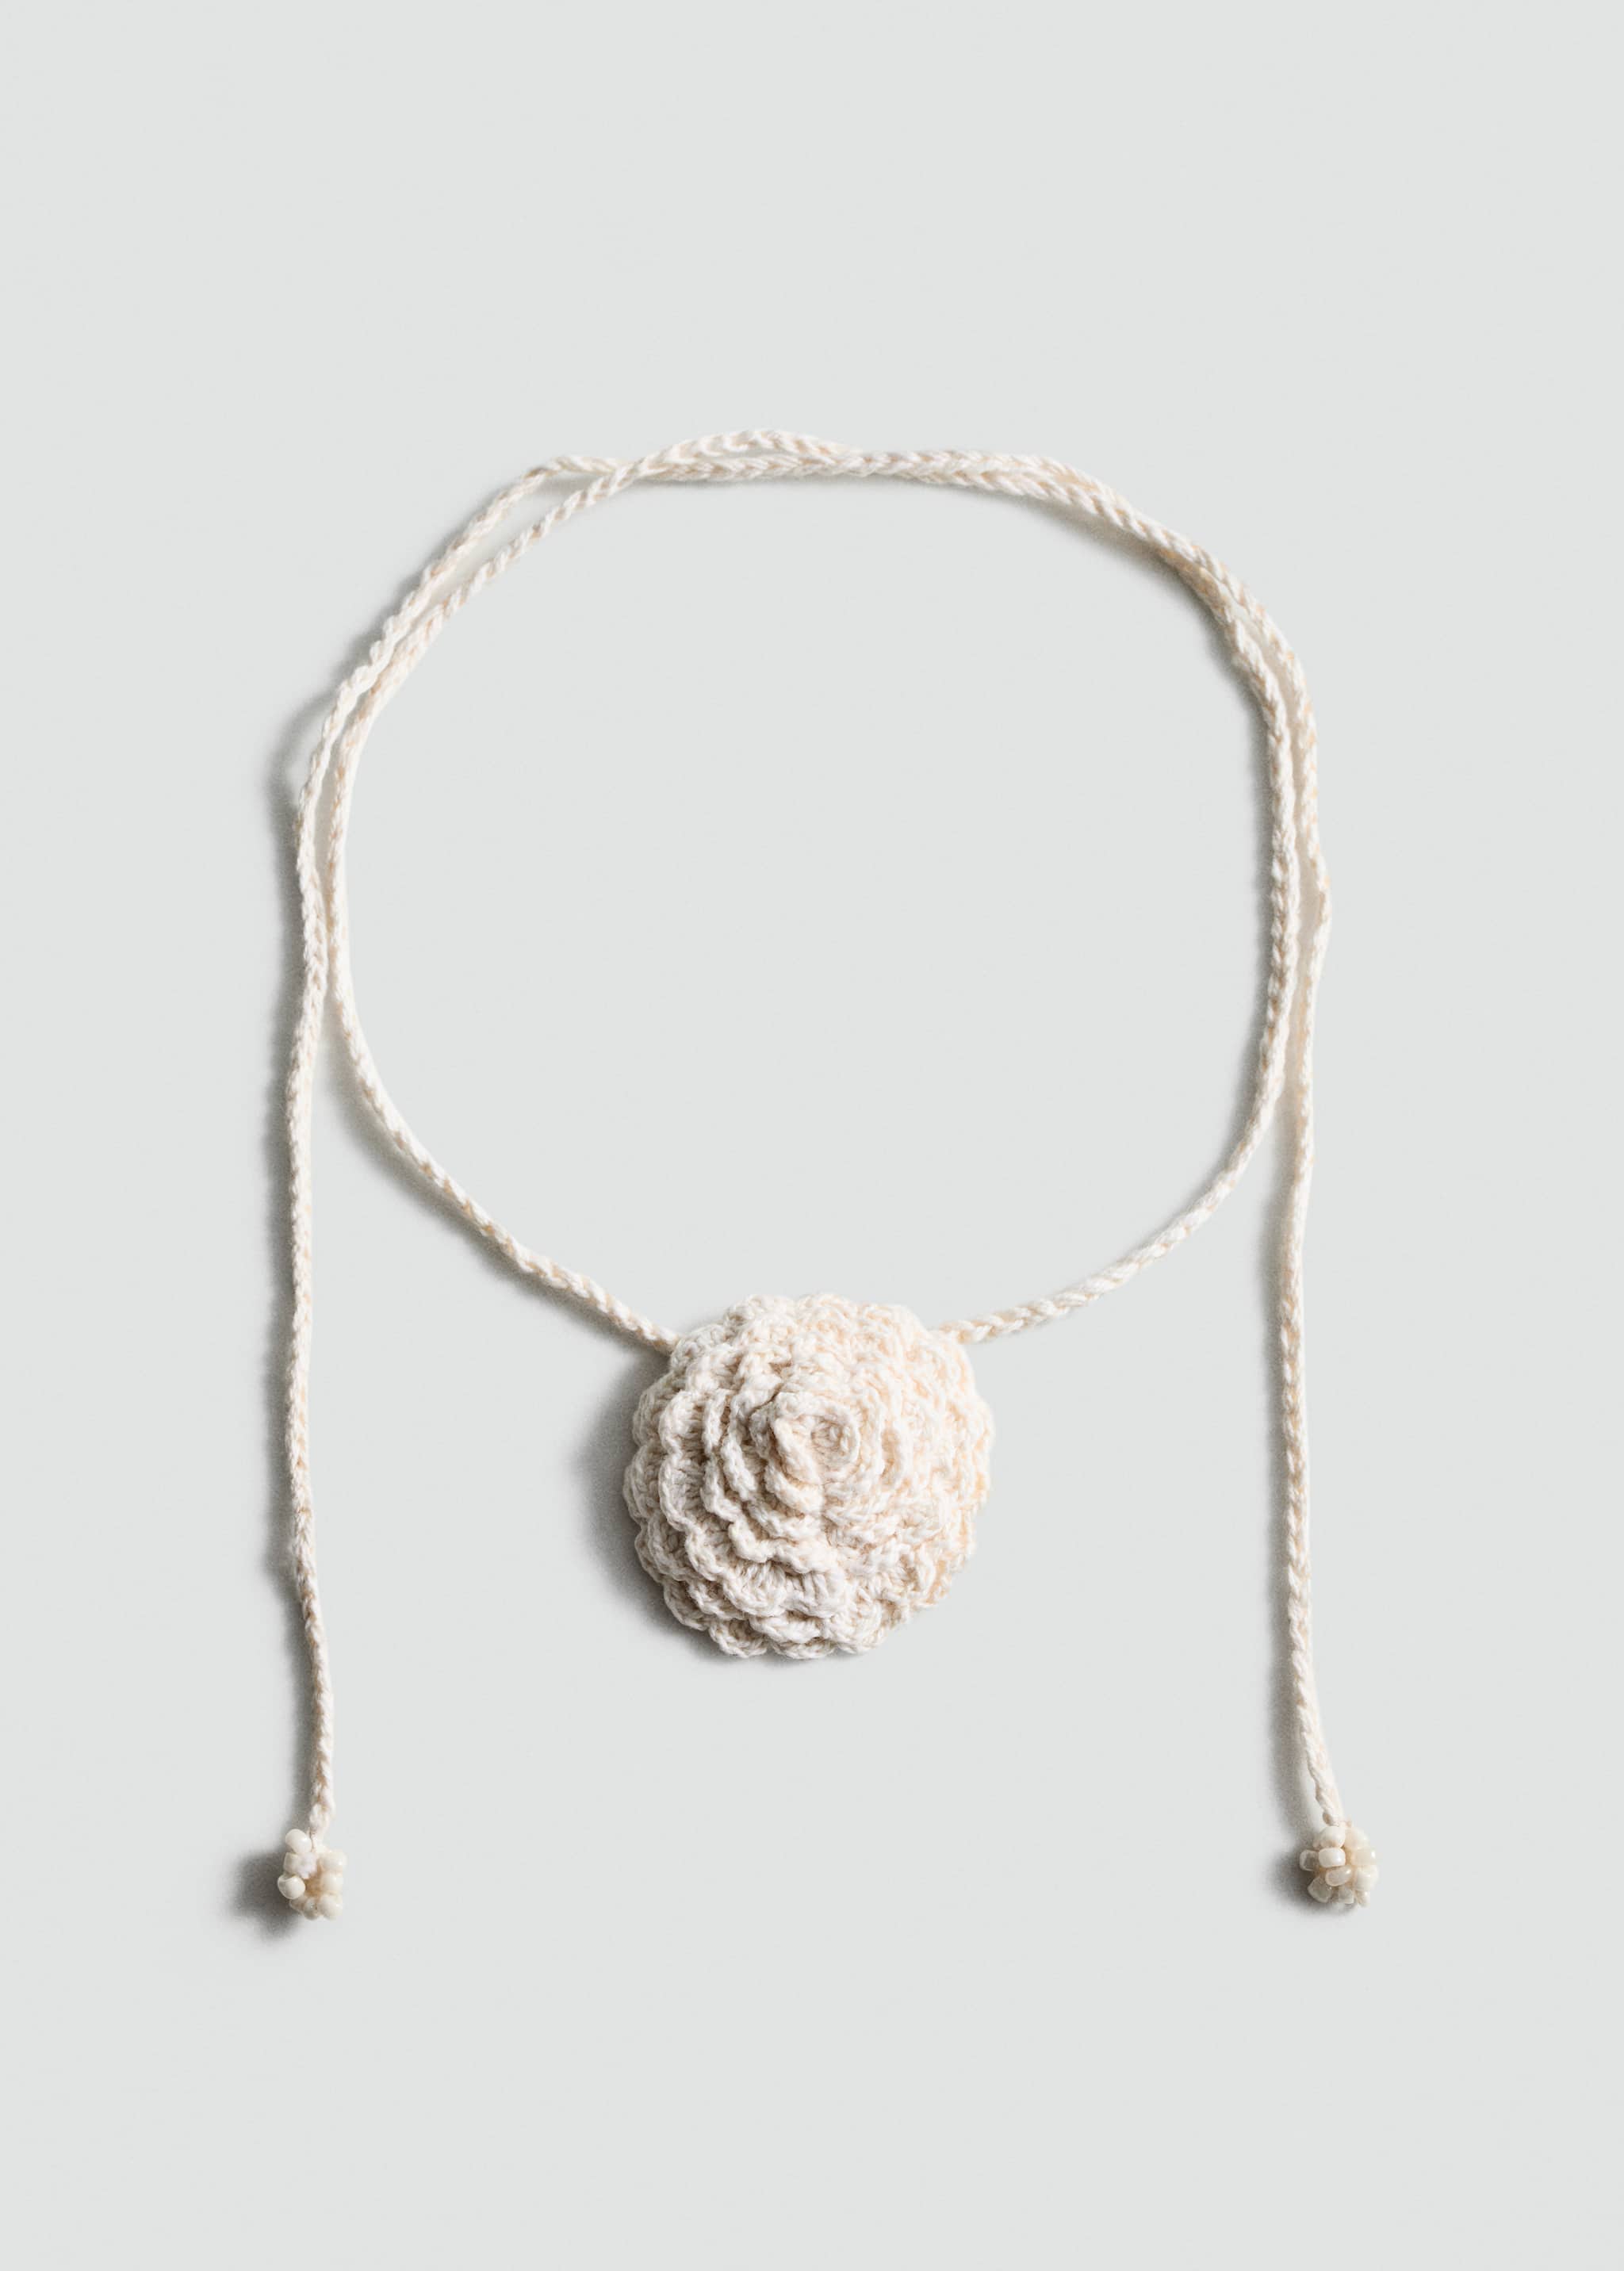 Flower choker necklace - Article without model